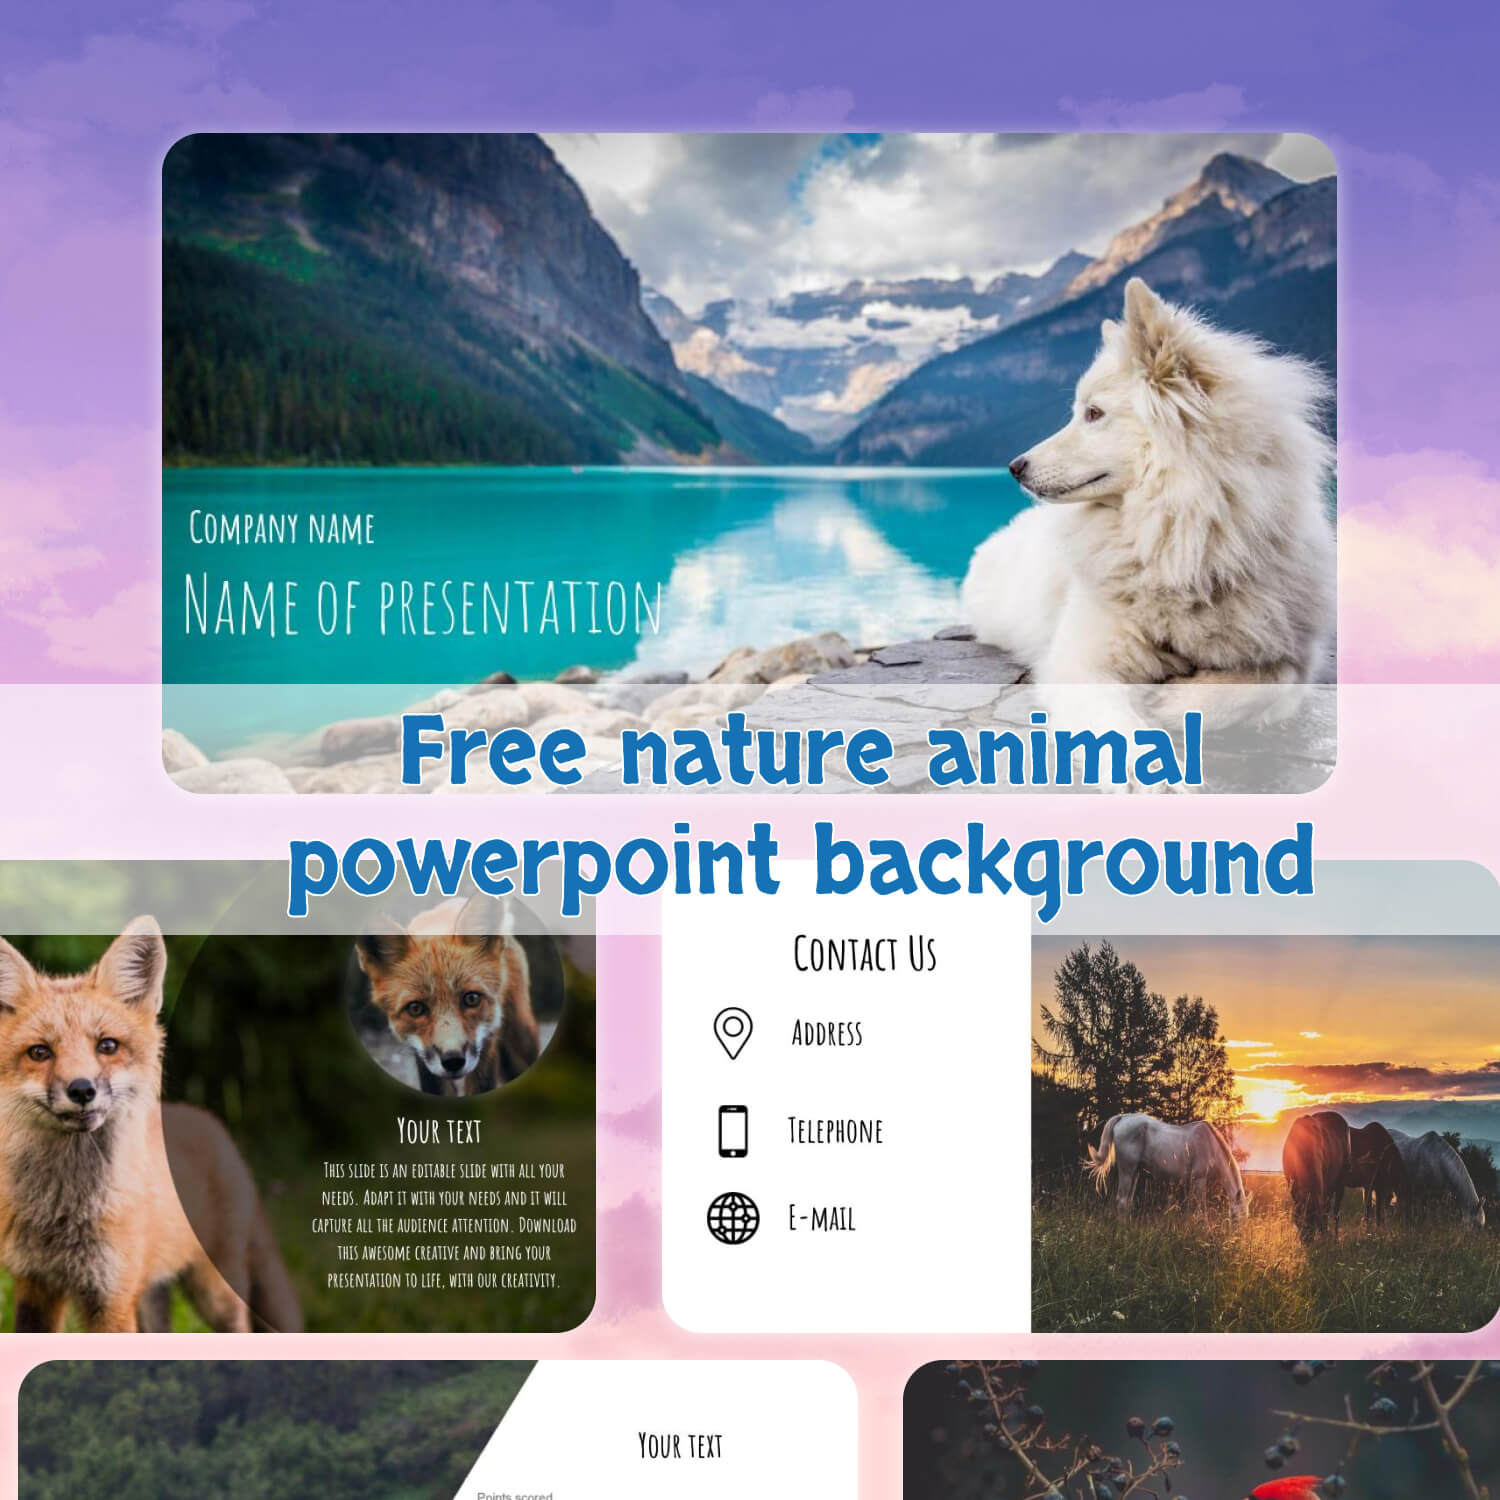 Free Nature Animal Powerpoint Background.